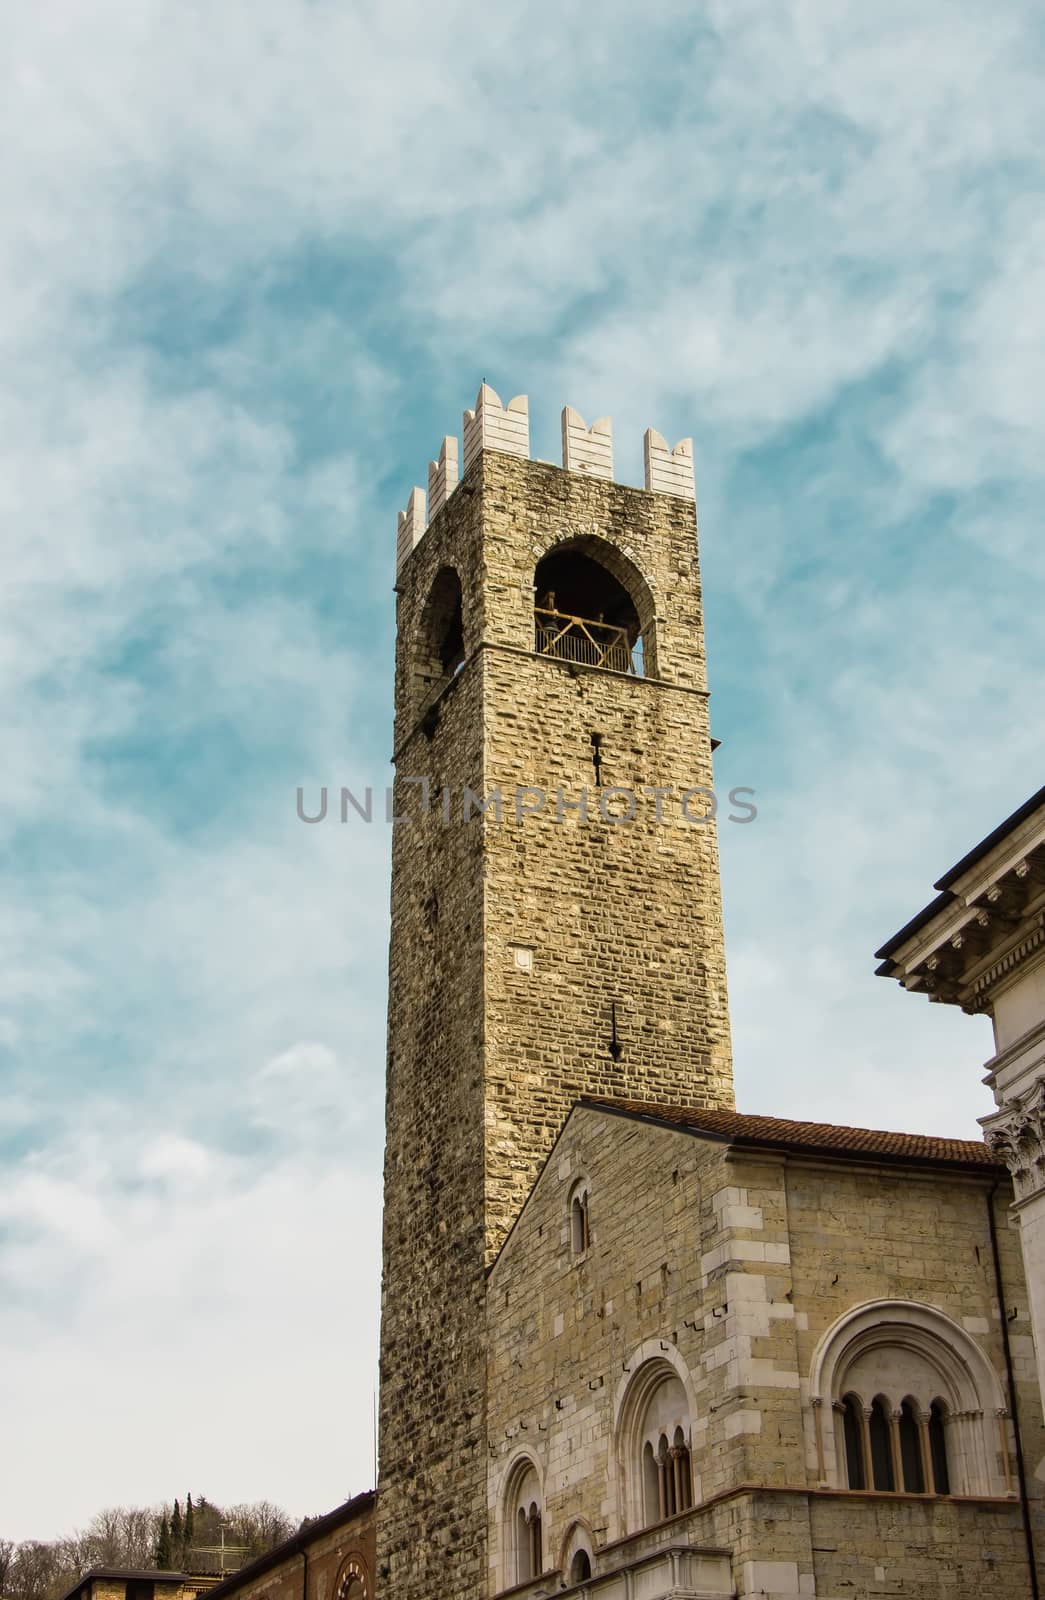 Tower of Pegol or Tower of the People, is the stone tower of Broletto Palace